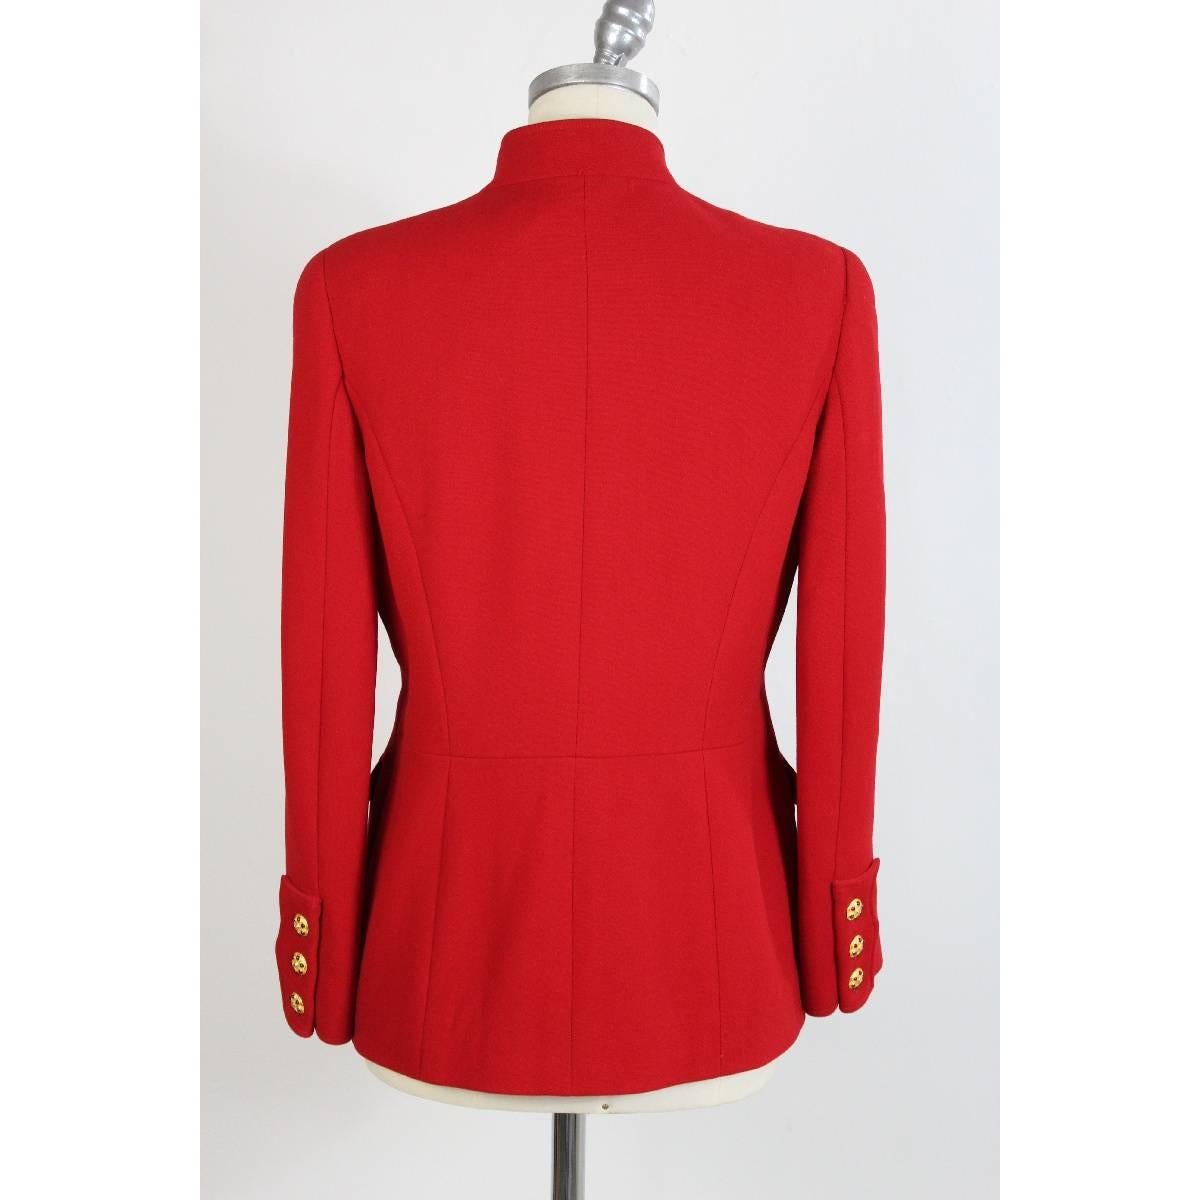 Chanel Boutique 1980s vintage 100% pure wool red long jacket, there are two pockets on the chest and two on the sides, inside lining with logo, closing with gold jewel buttons, size 42 made france, excellent conditions like new. The purchase price